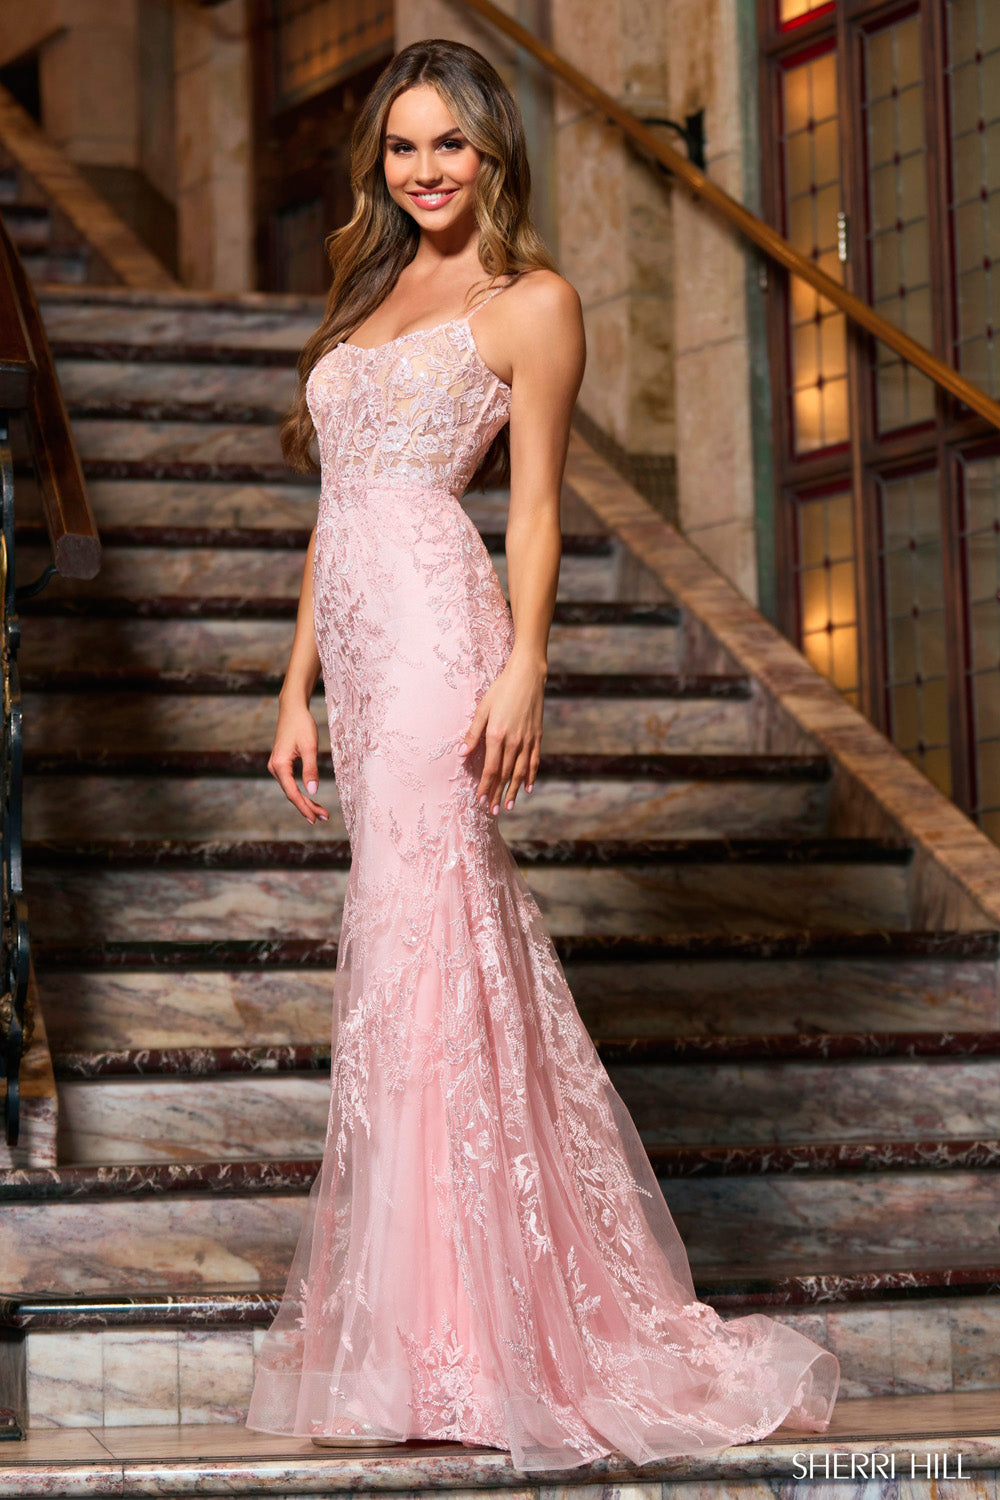 Pink Tulle Lace A-line Sweetheart Prom Dresses MP683 | Musebridals